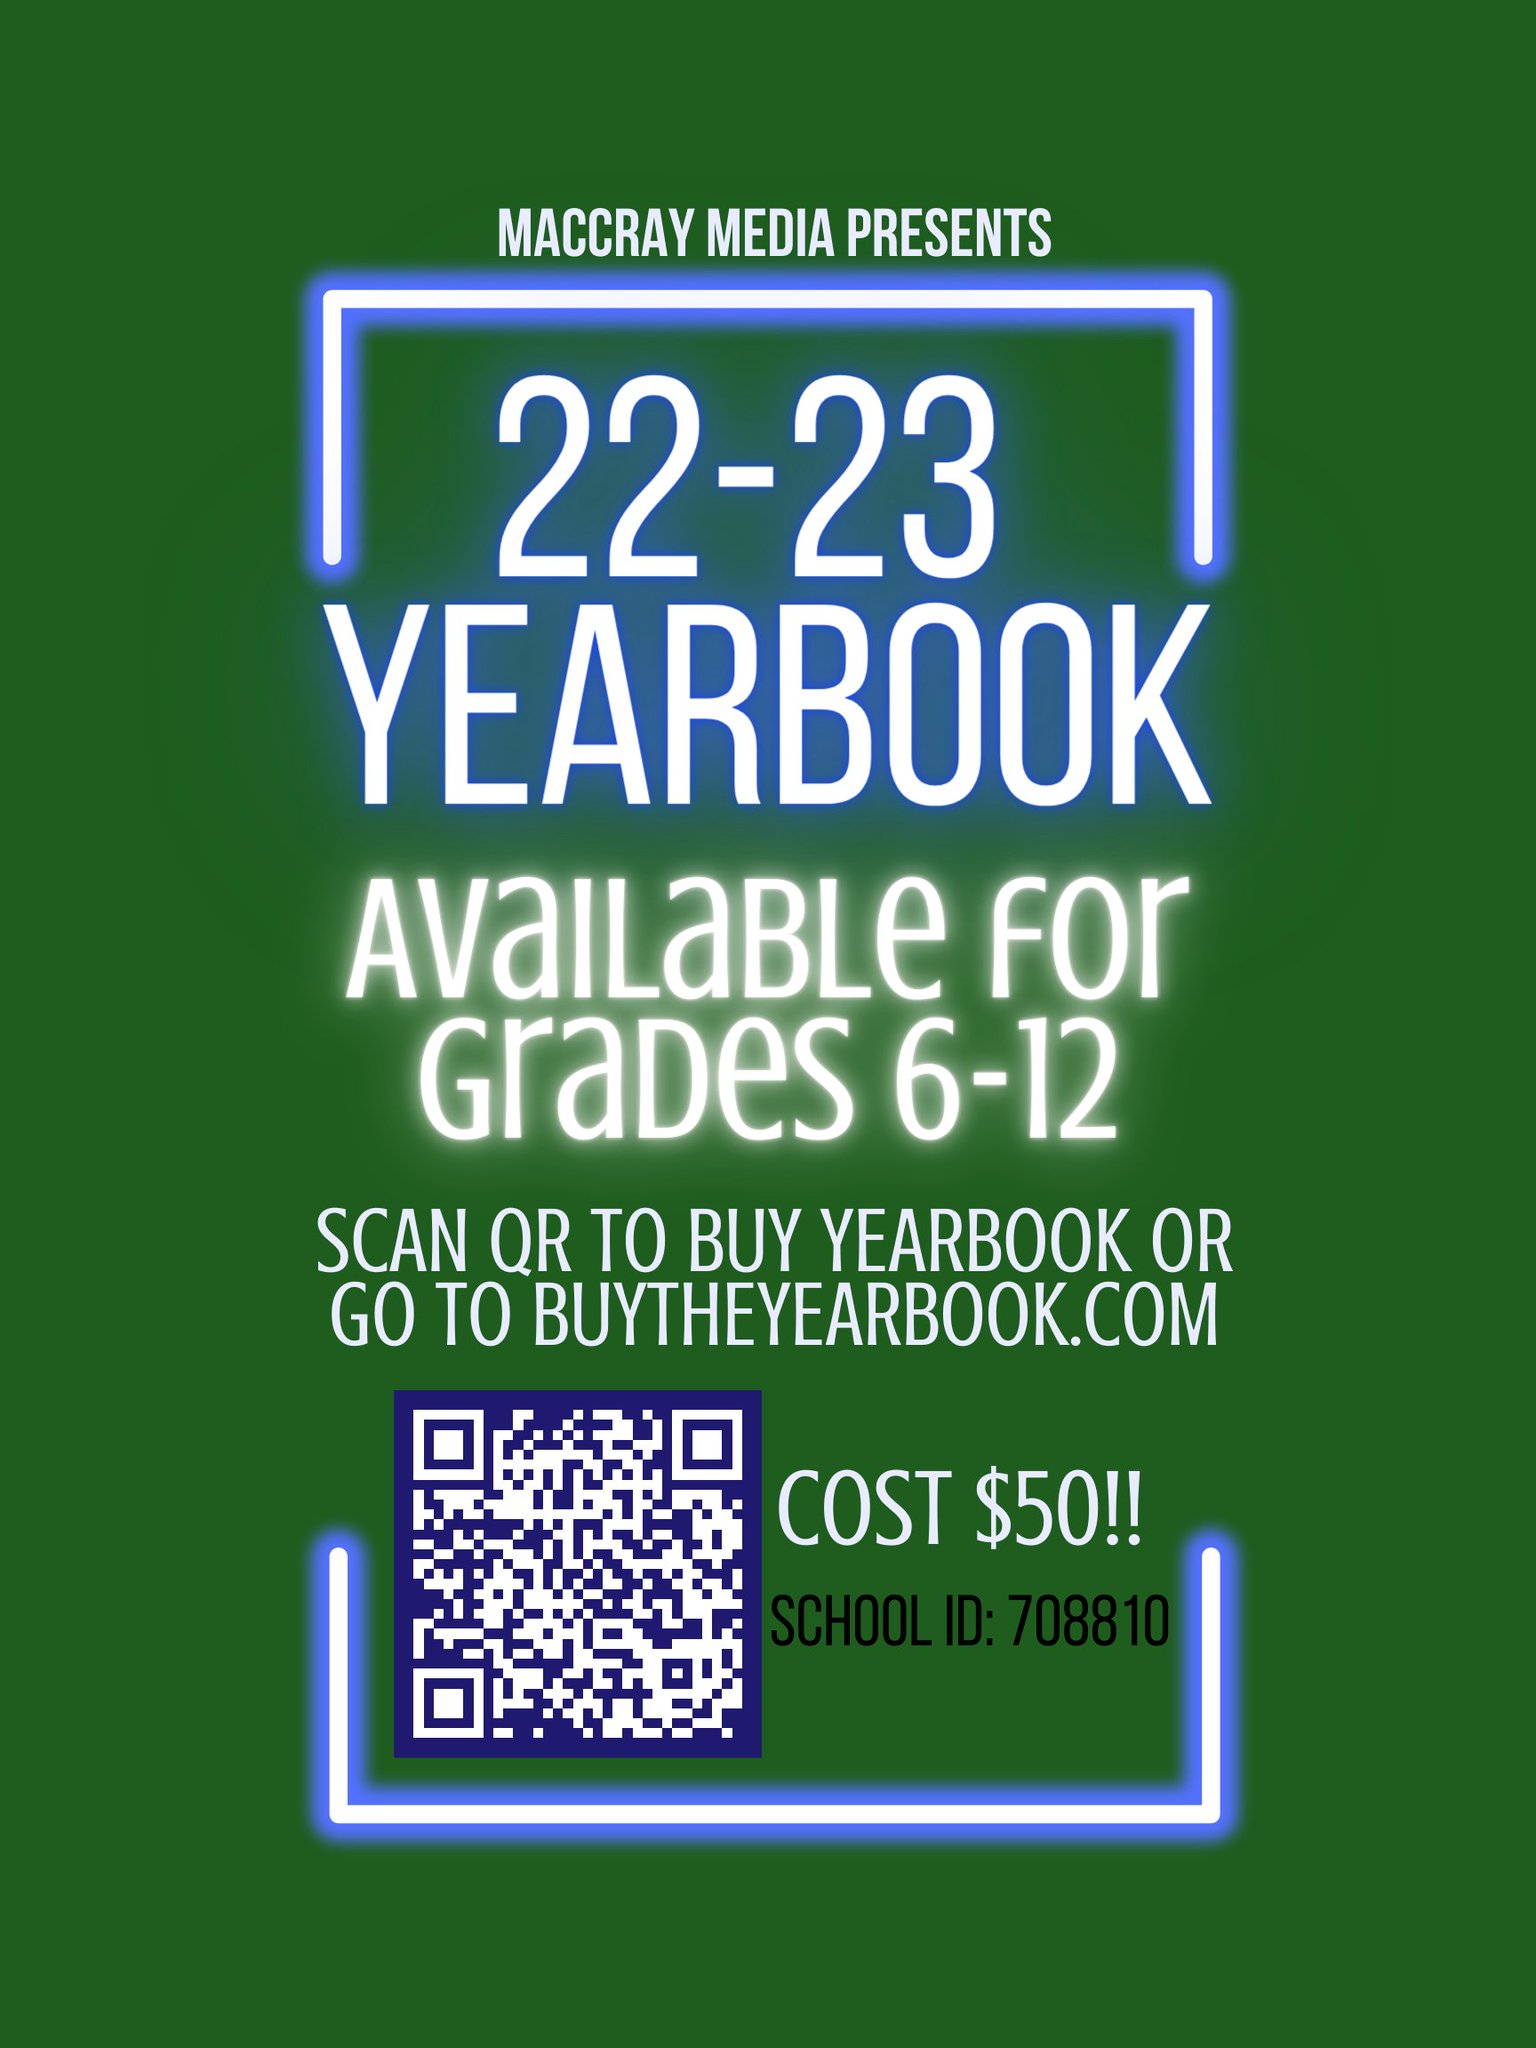 Green background with two white-blue brackets looking like neon light strips. White text above the top bracket saying "MACCRAY Media presents". Below the top bracket, white text with blue outline saying "22-23 Yearbook". White text with white highlight stating "available for grades 6-12". plain white text stating "Scan QR to Buy yearbook or Go to BuyTheYearbook.com Cost $50". black text stating "School ID: 708810". Qr code with White background and blue feature.